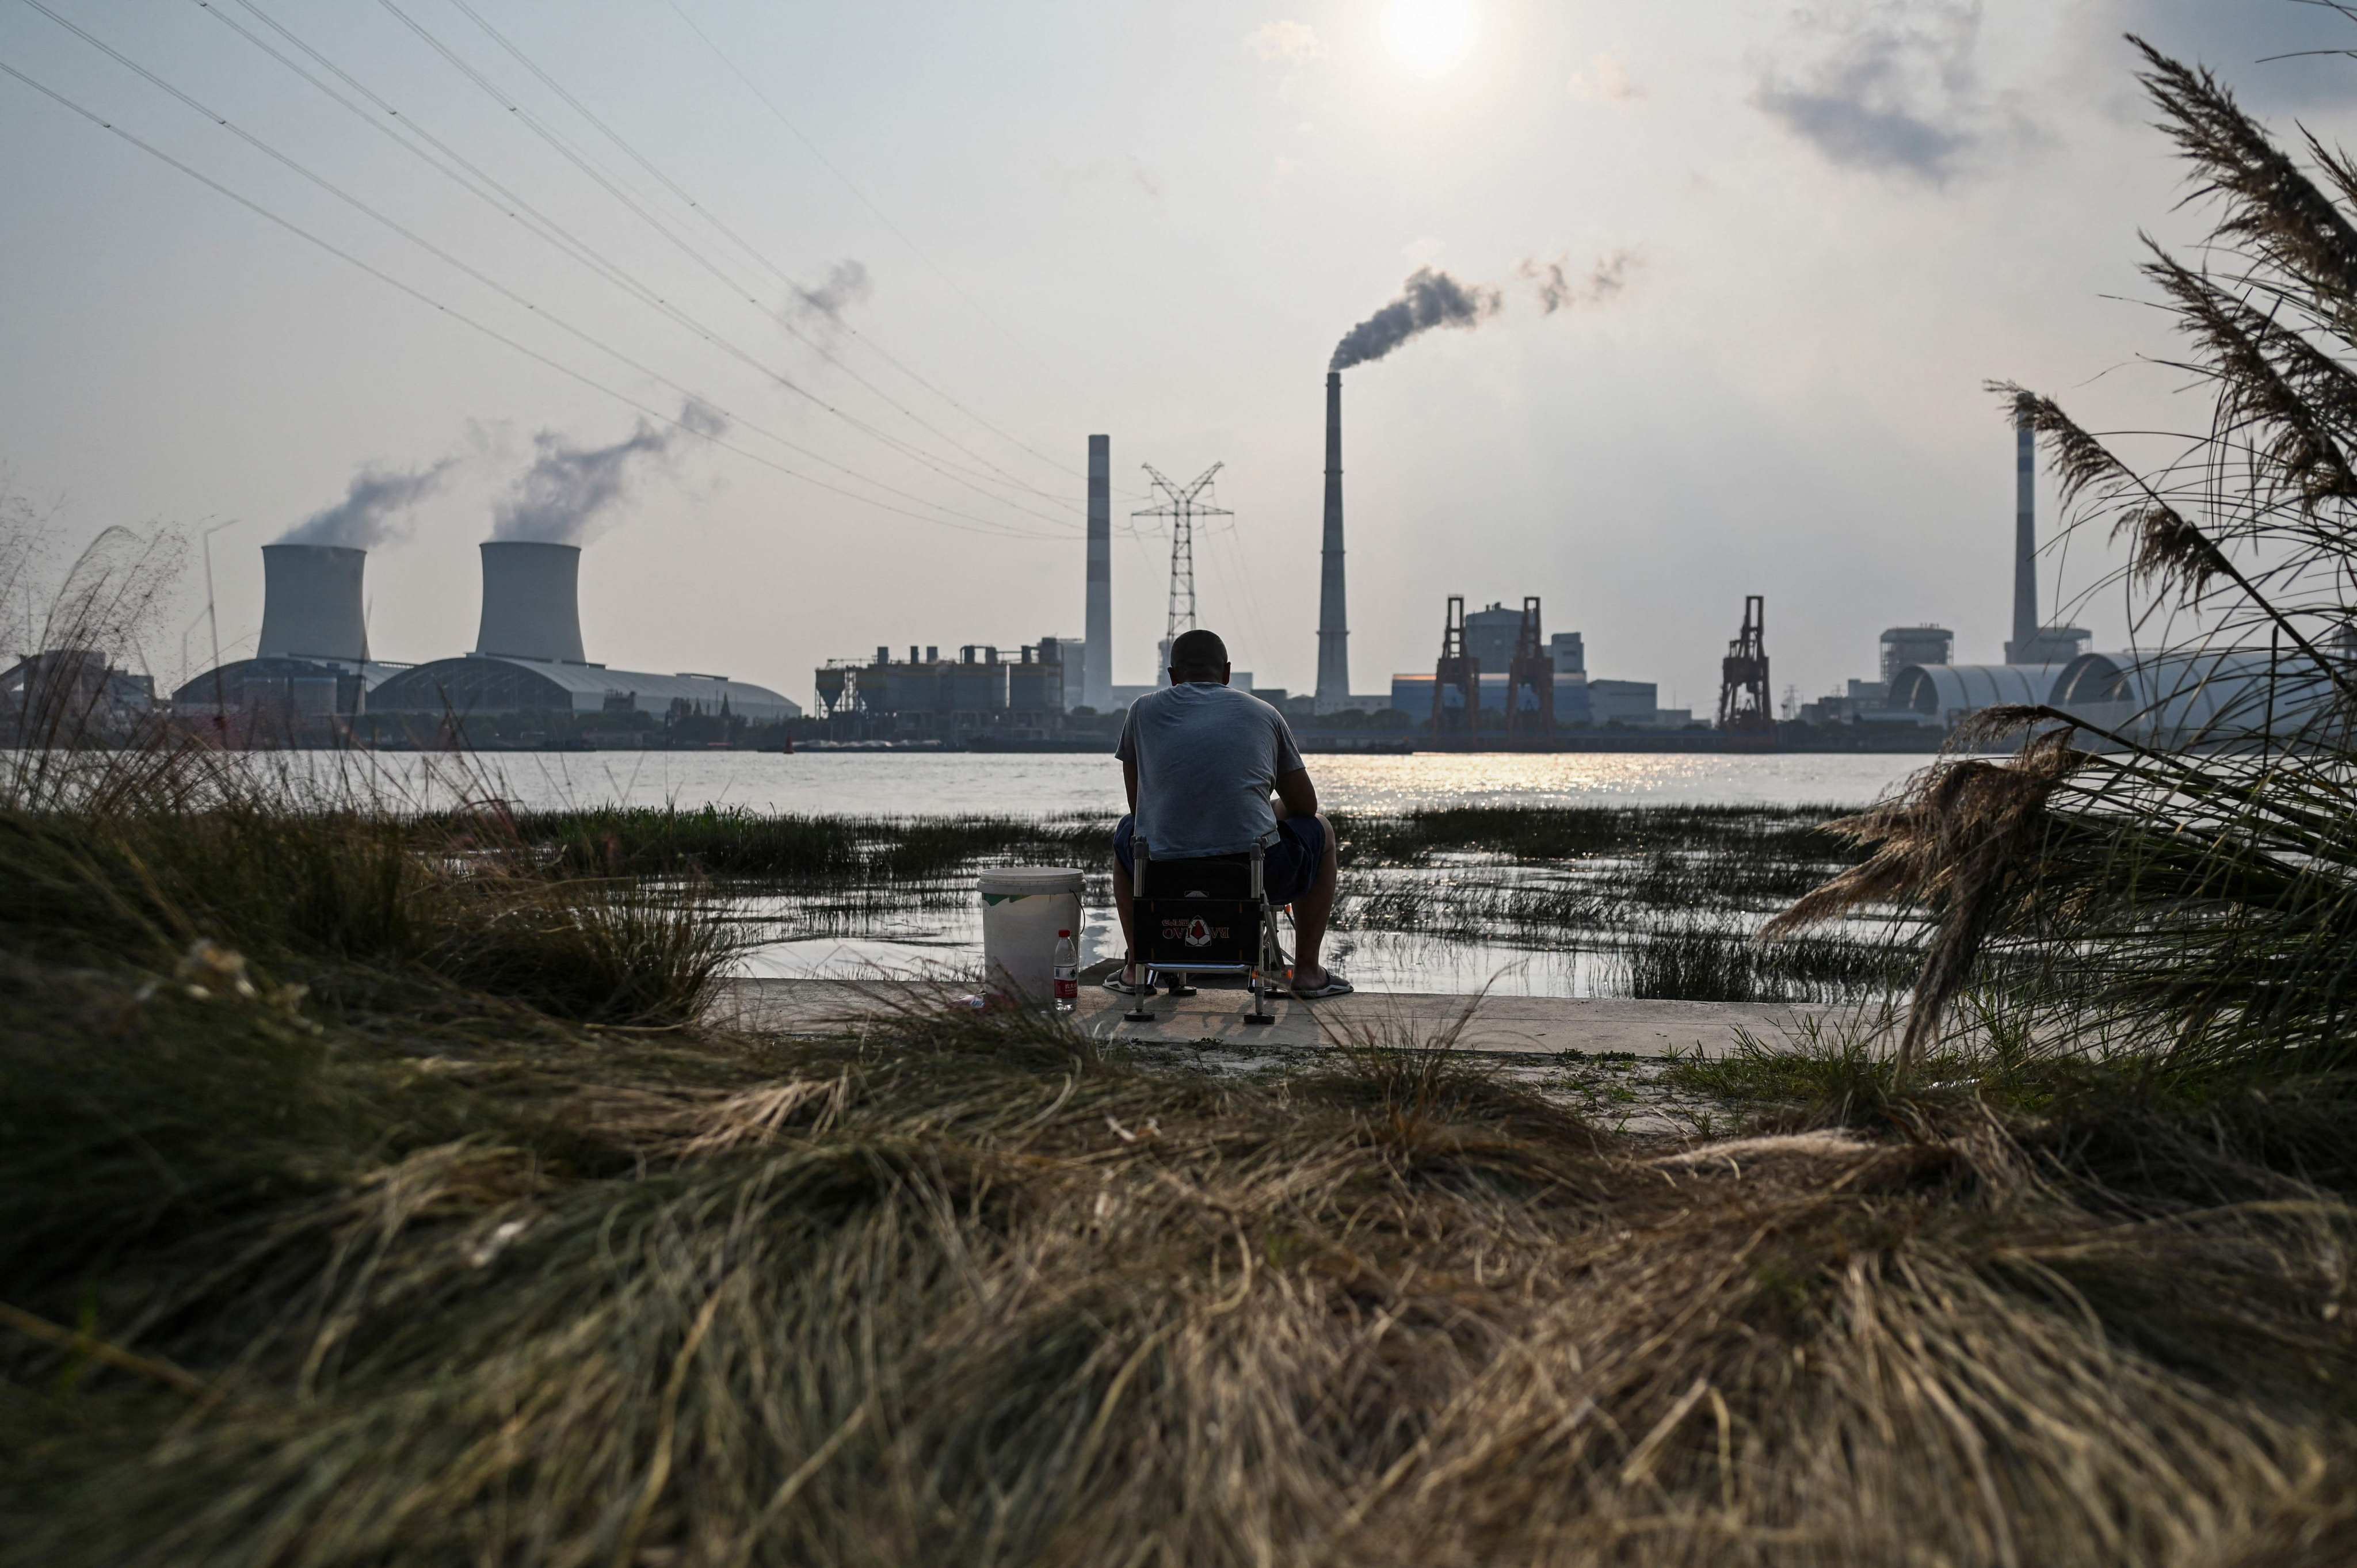 An angler is seen fishing along the Huangpu river across from the Wujing Coal-Electricity Power Station in Shanghai on September 28, 2021. Photo: AFP